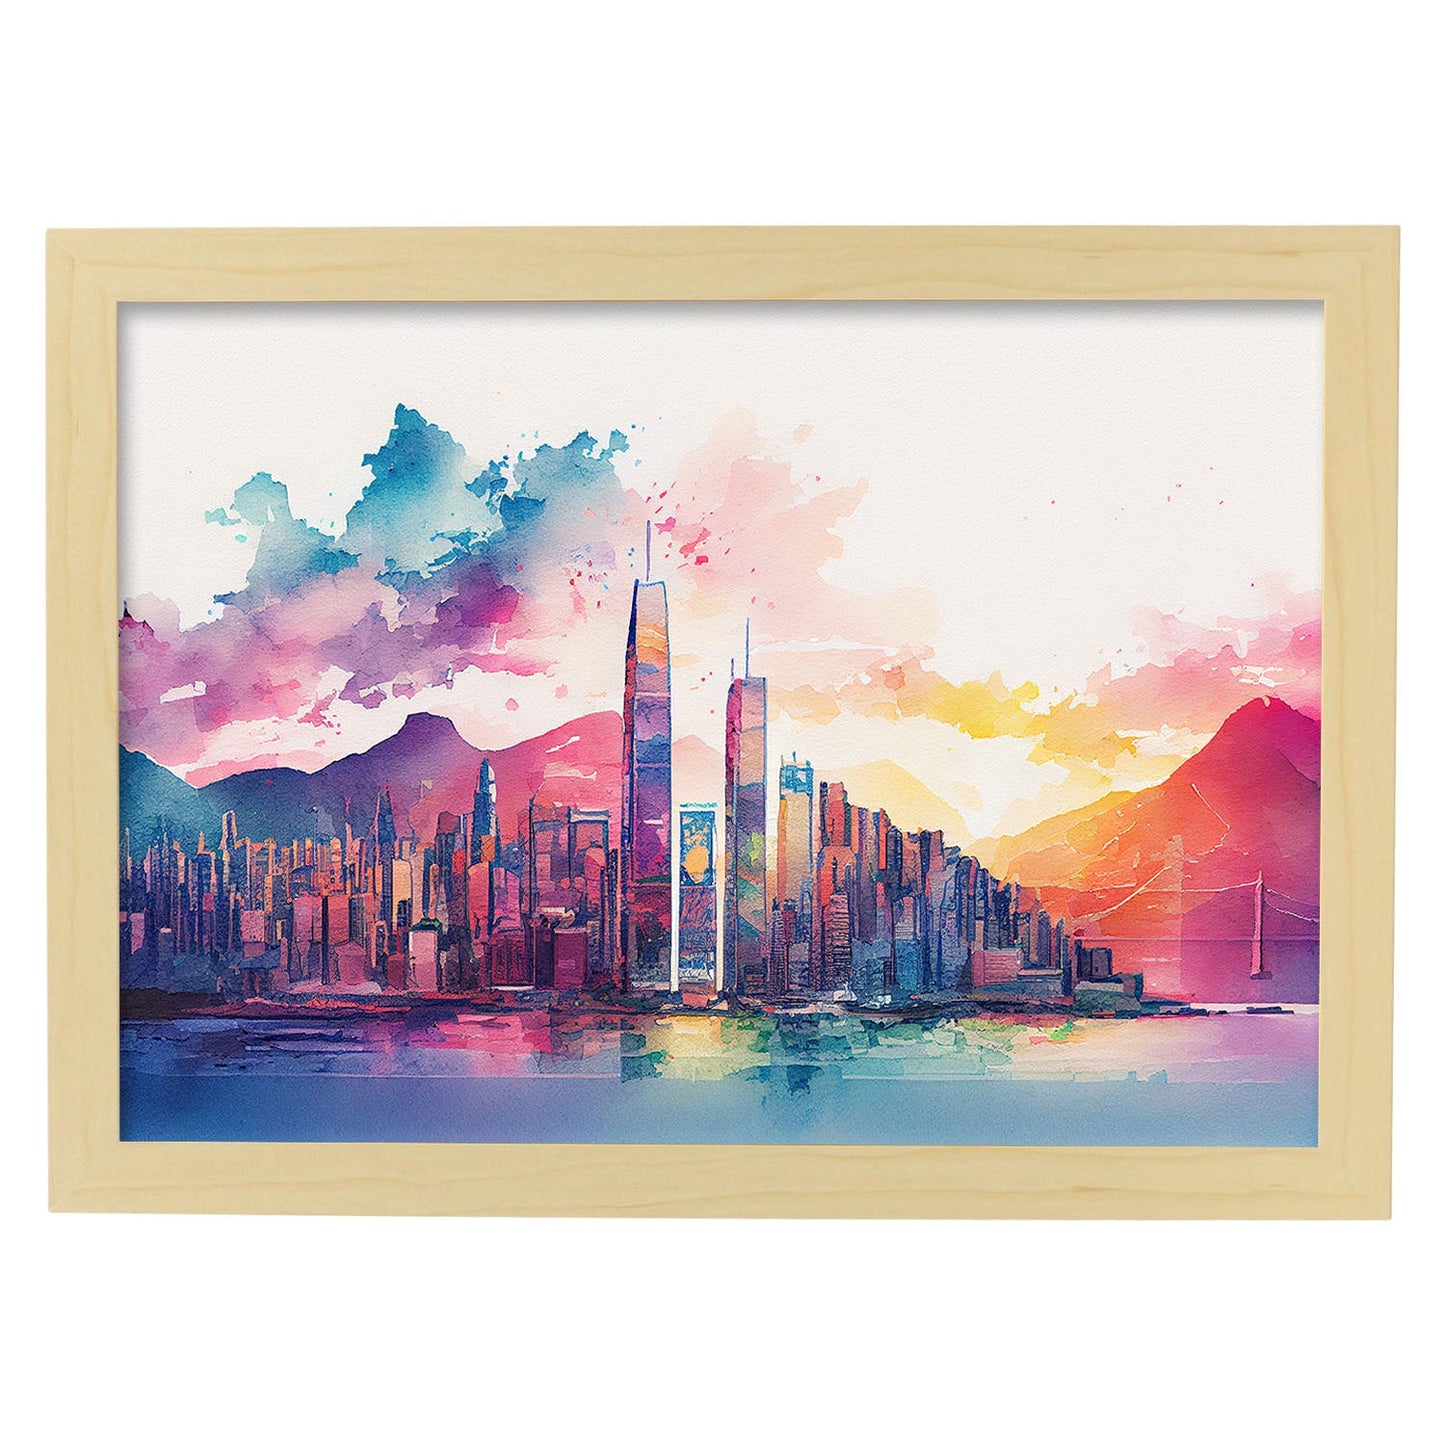 Nacnic watercolor of a skyline of the city of Hong Kong_3. Aesthetic Wall Art Prints for Bedroom or Living Room Design.-Artwork-Nacnic-A4-Marco Madera Clara-Nacnic Estudio SL